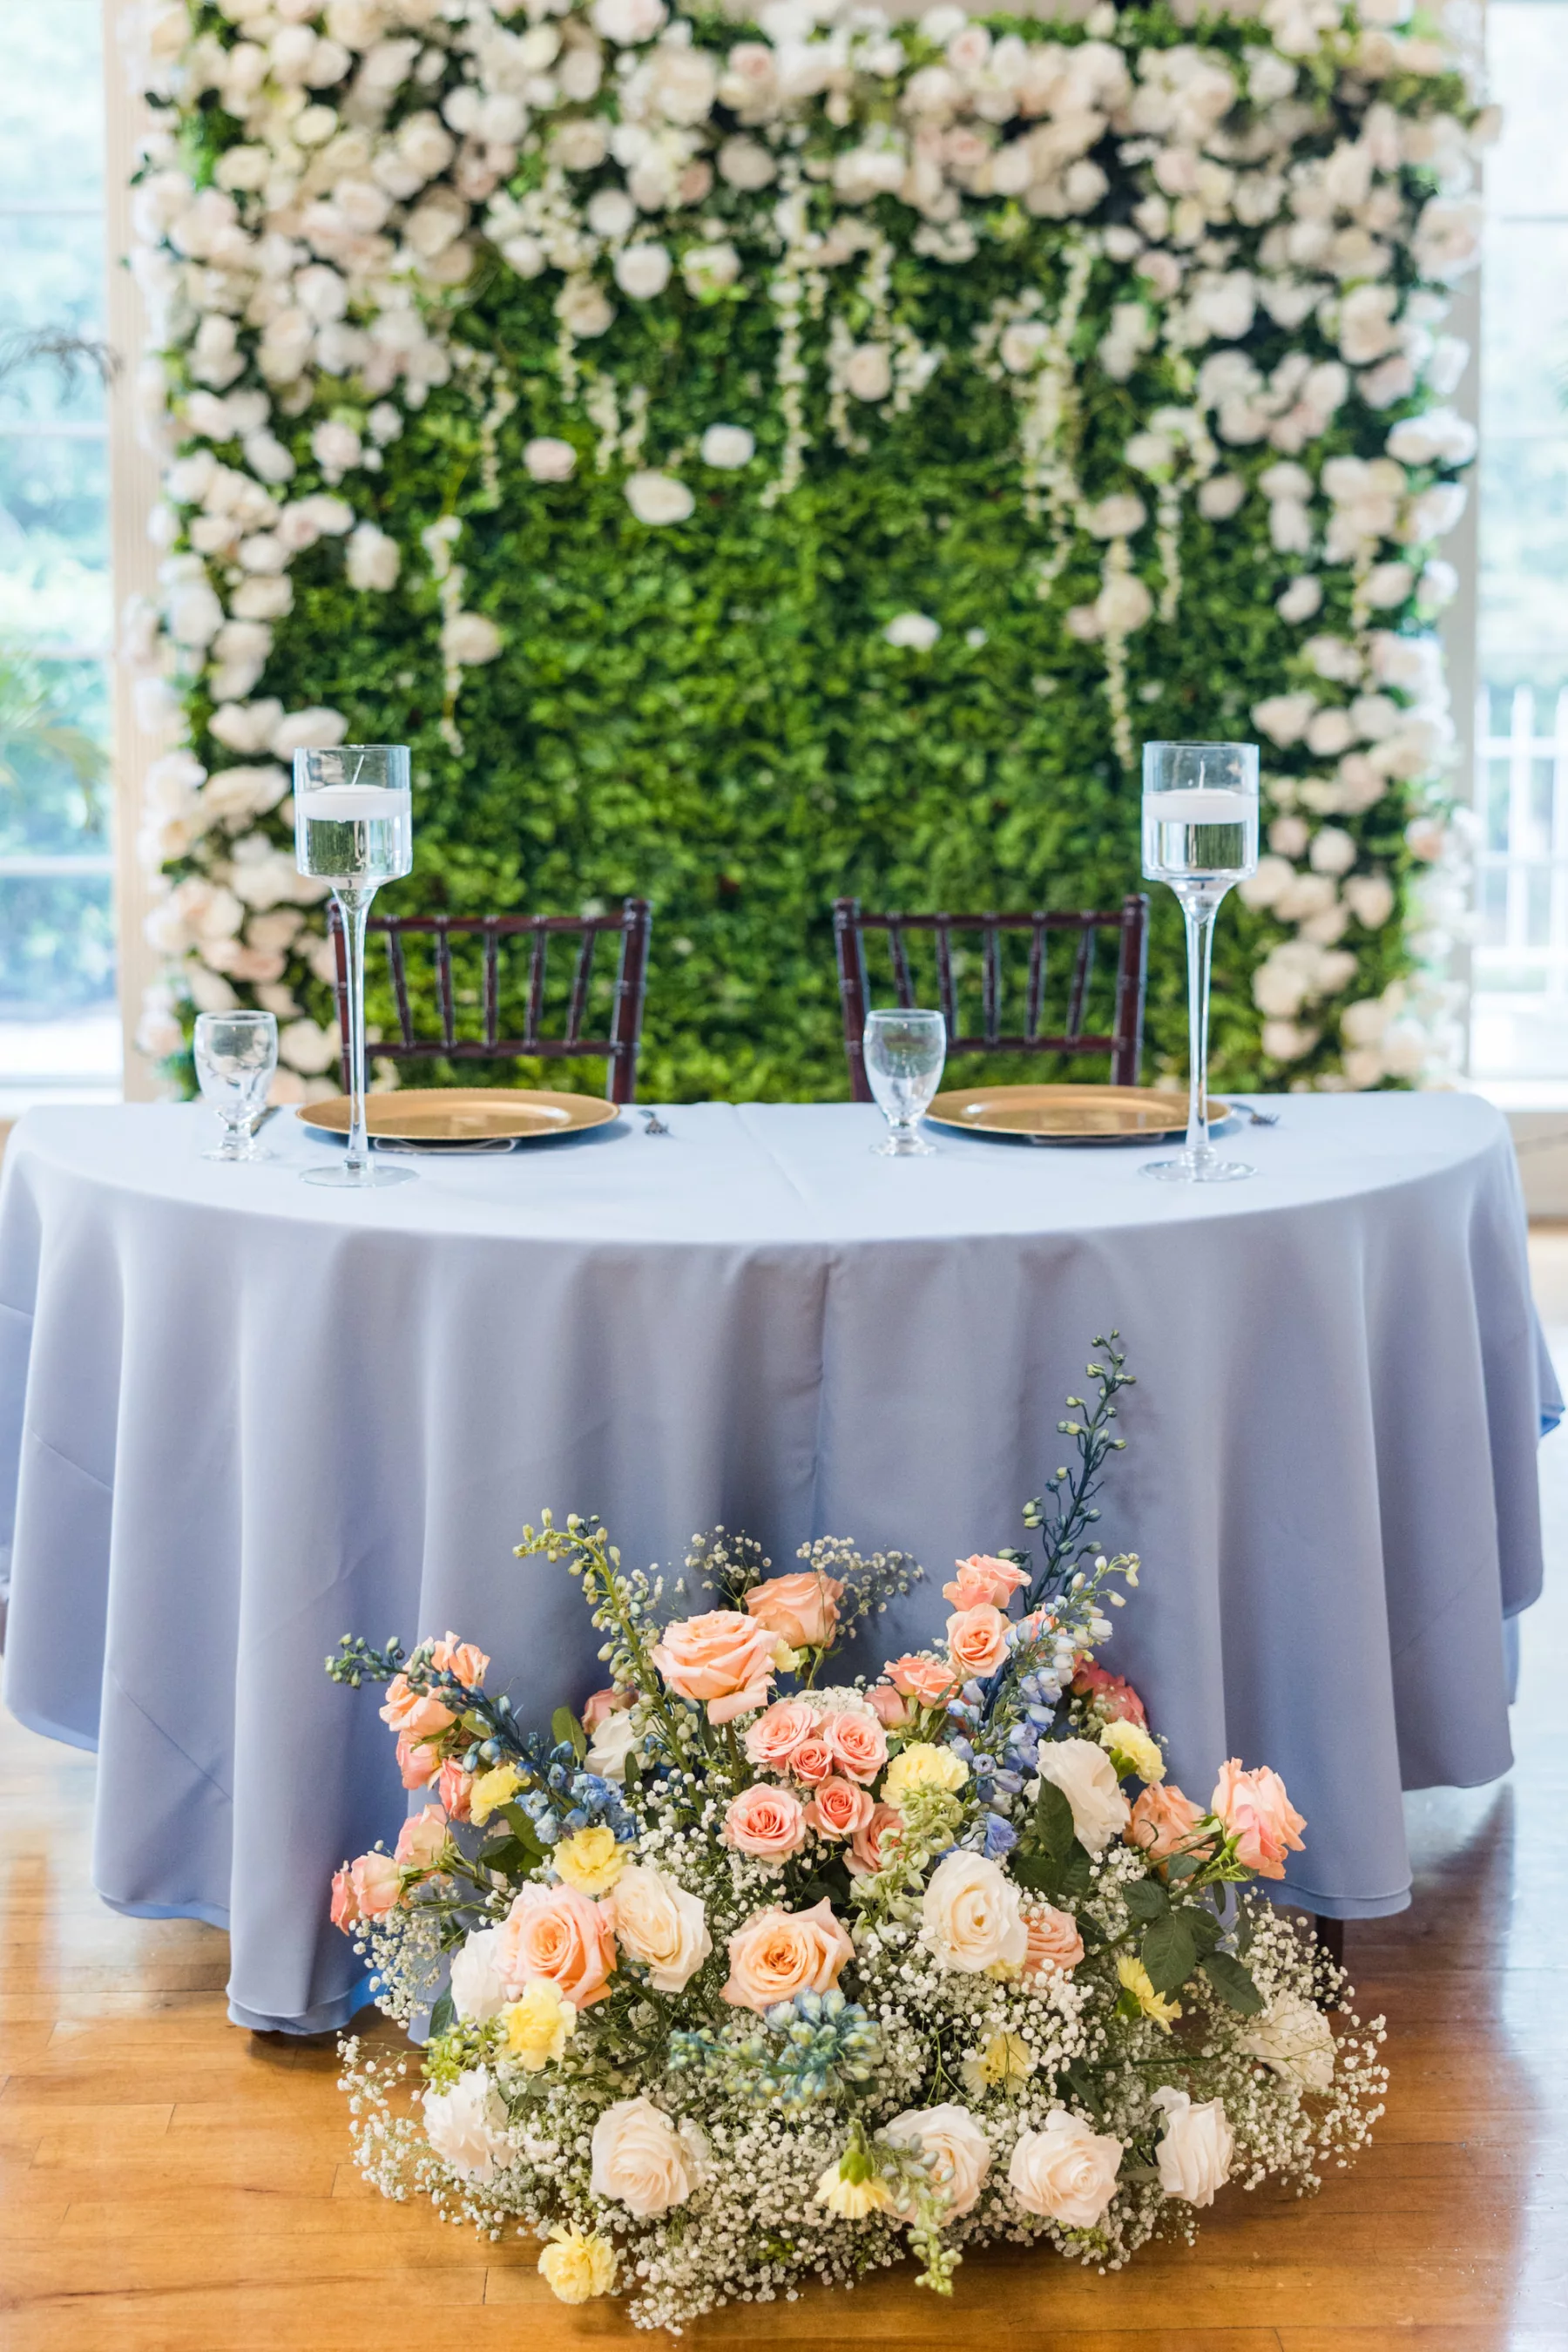 Blue and Peach English Garden Inspired Wedding Reception Sweetheart Table Decor Ideas | Peach Roses, Yellow Carnations, Baby's Breath, Blue Snapdragon Floor Flower Arrangement Inspiration